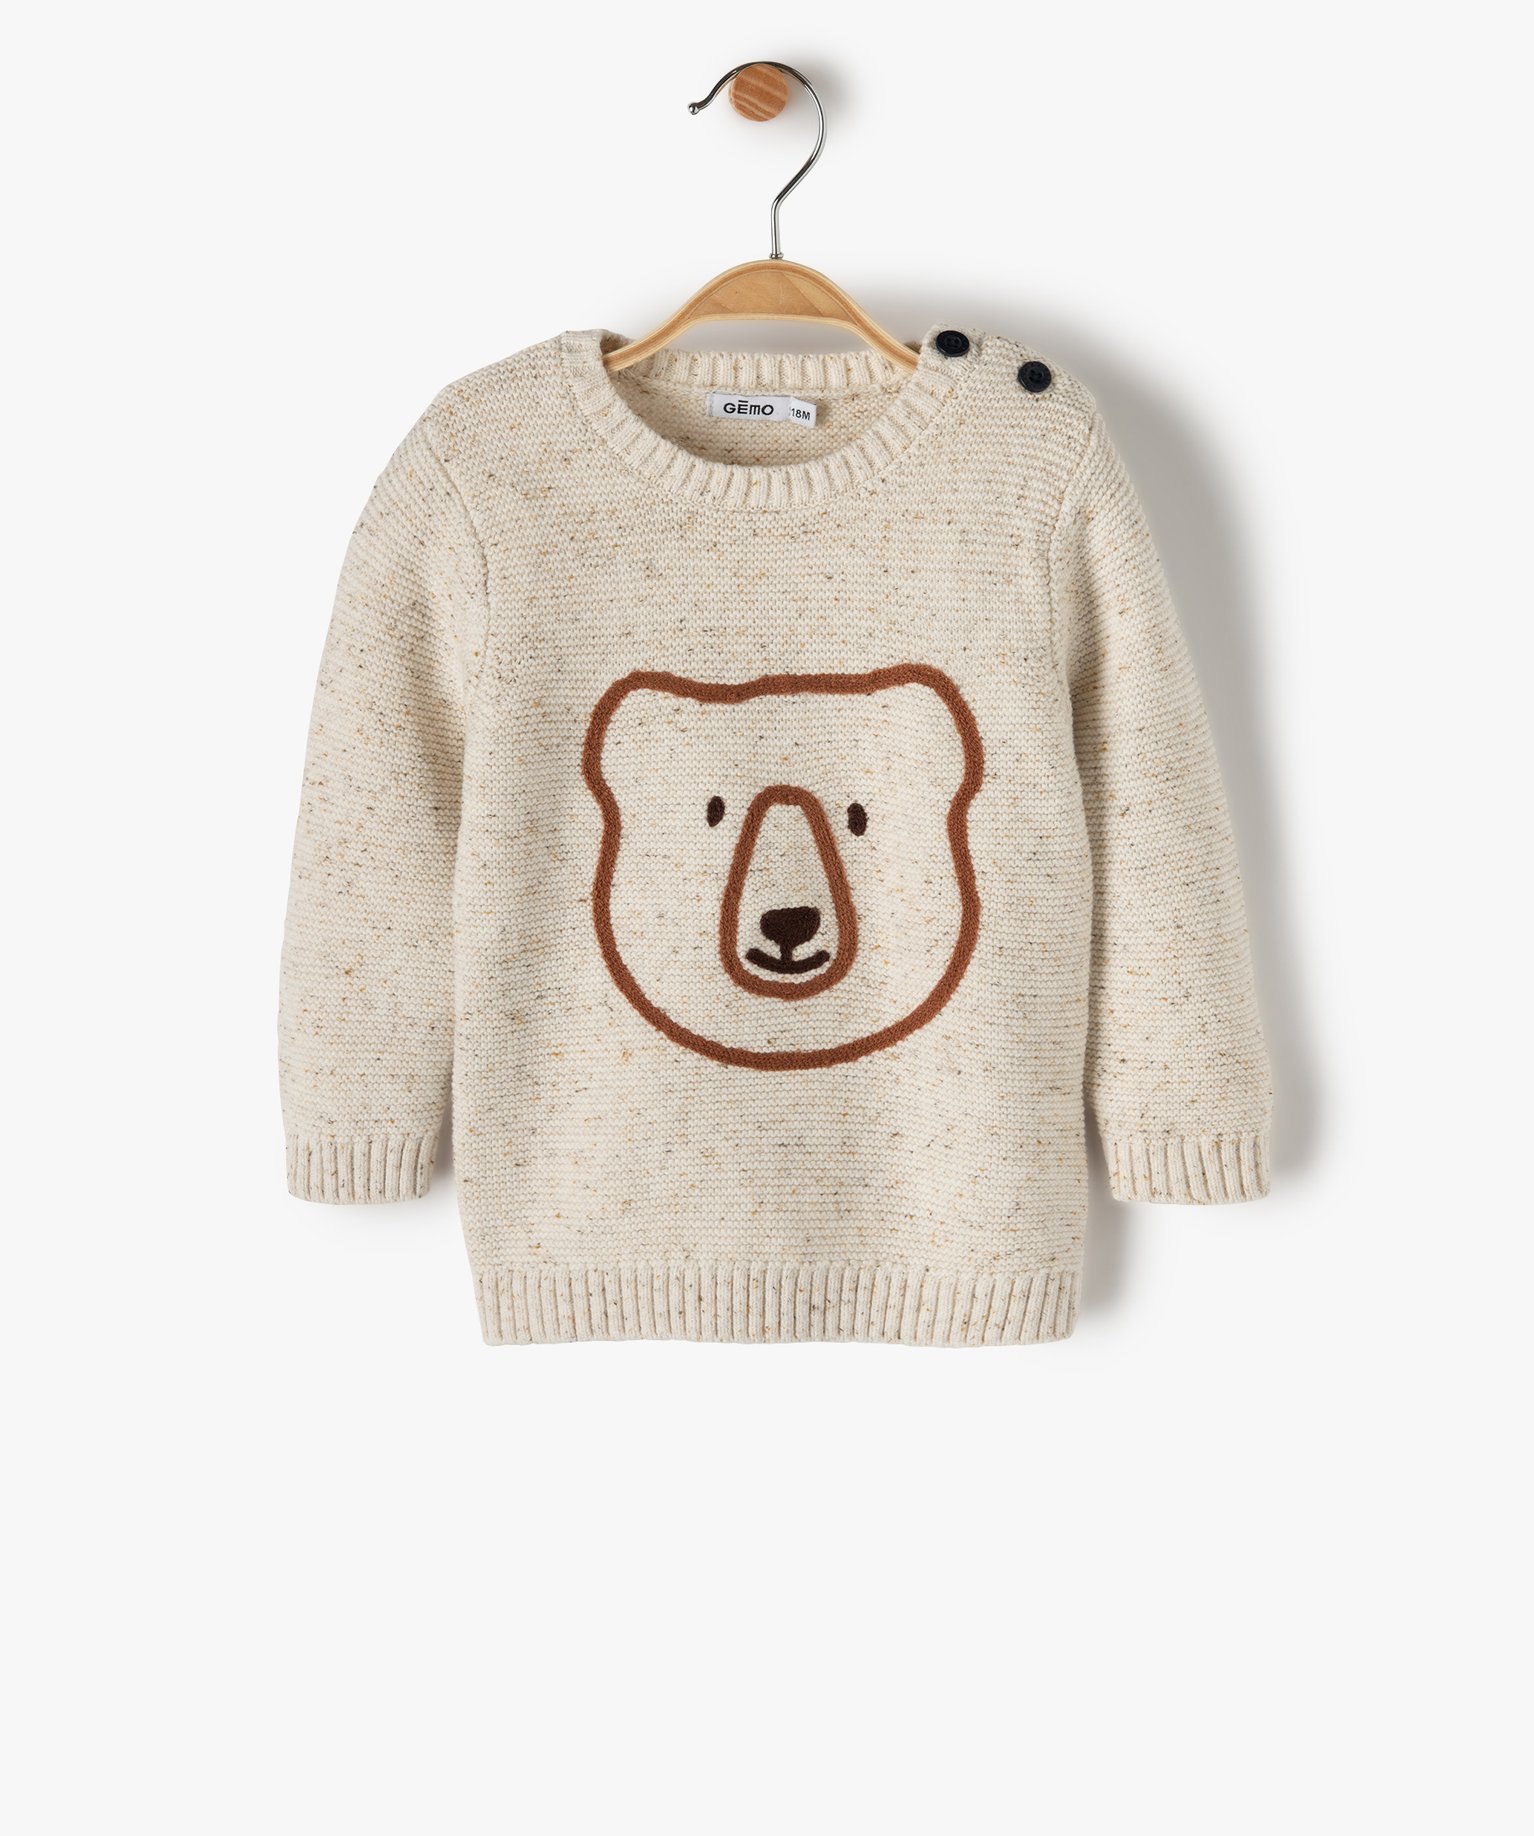 pull bebe garcon an maille chinee avec tete d’ours brodee beige pulls